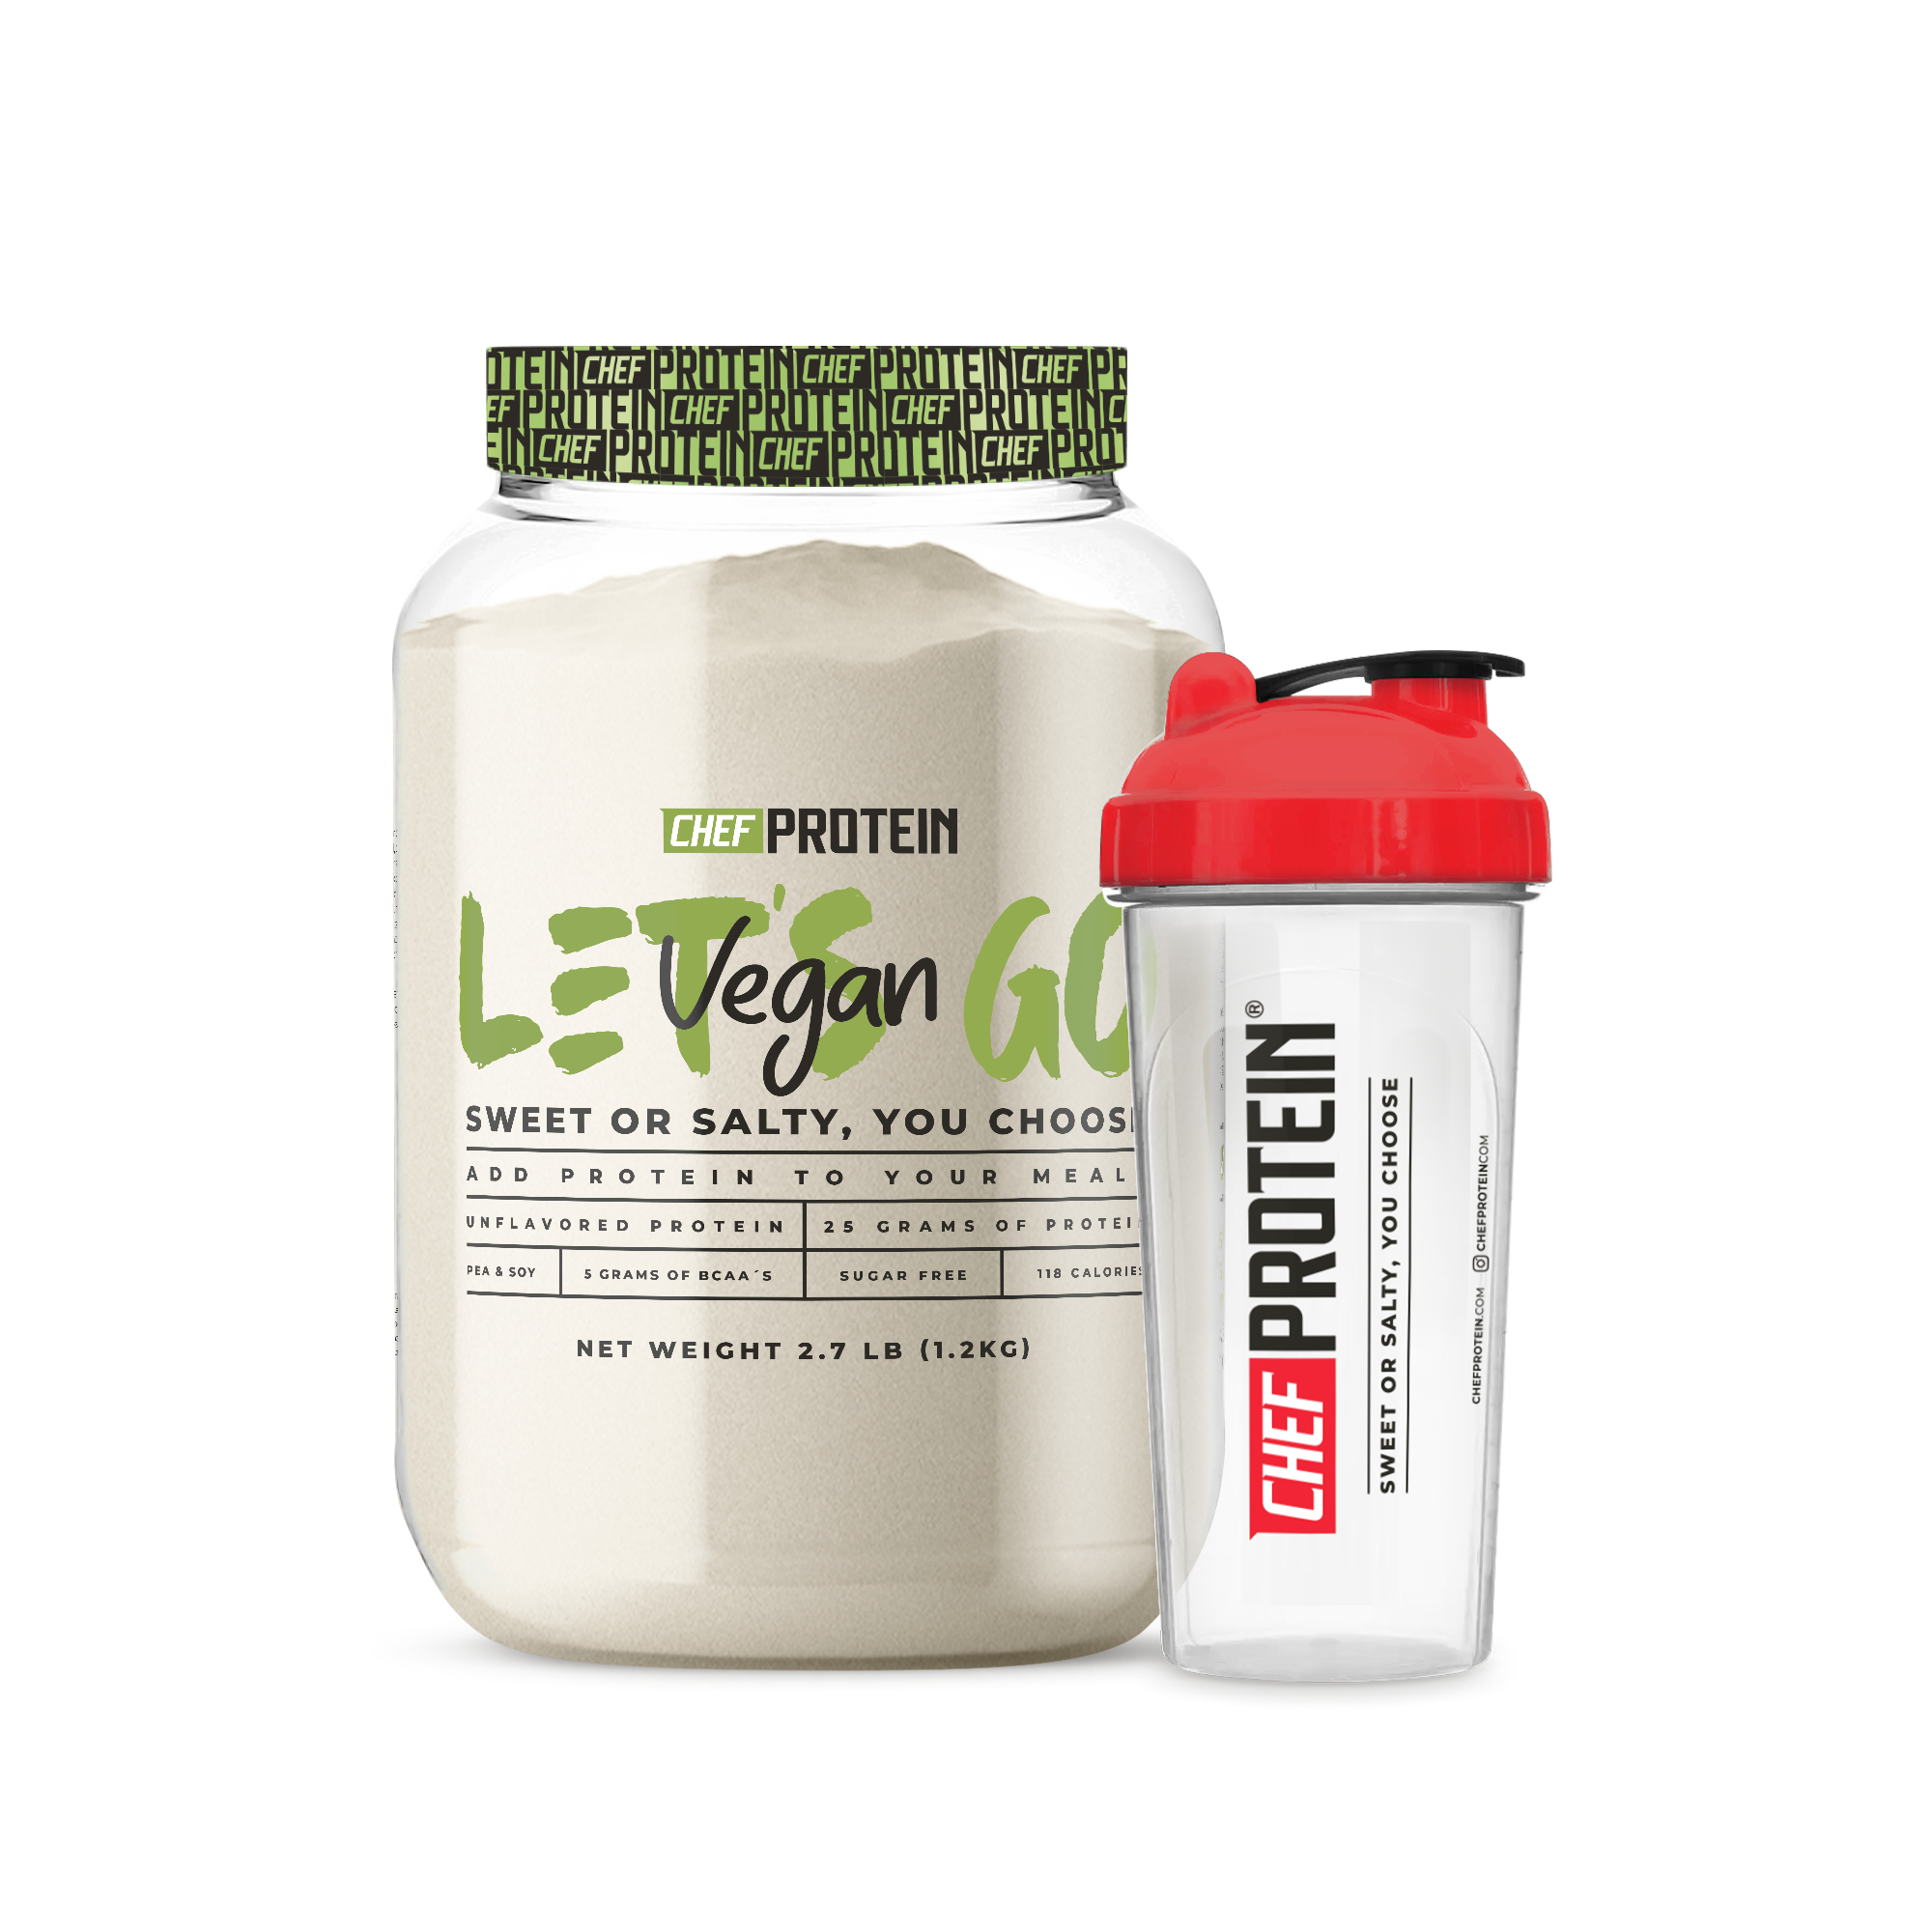 Chef Protein Vegan Unflavored + Shaker